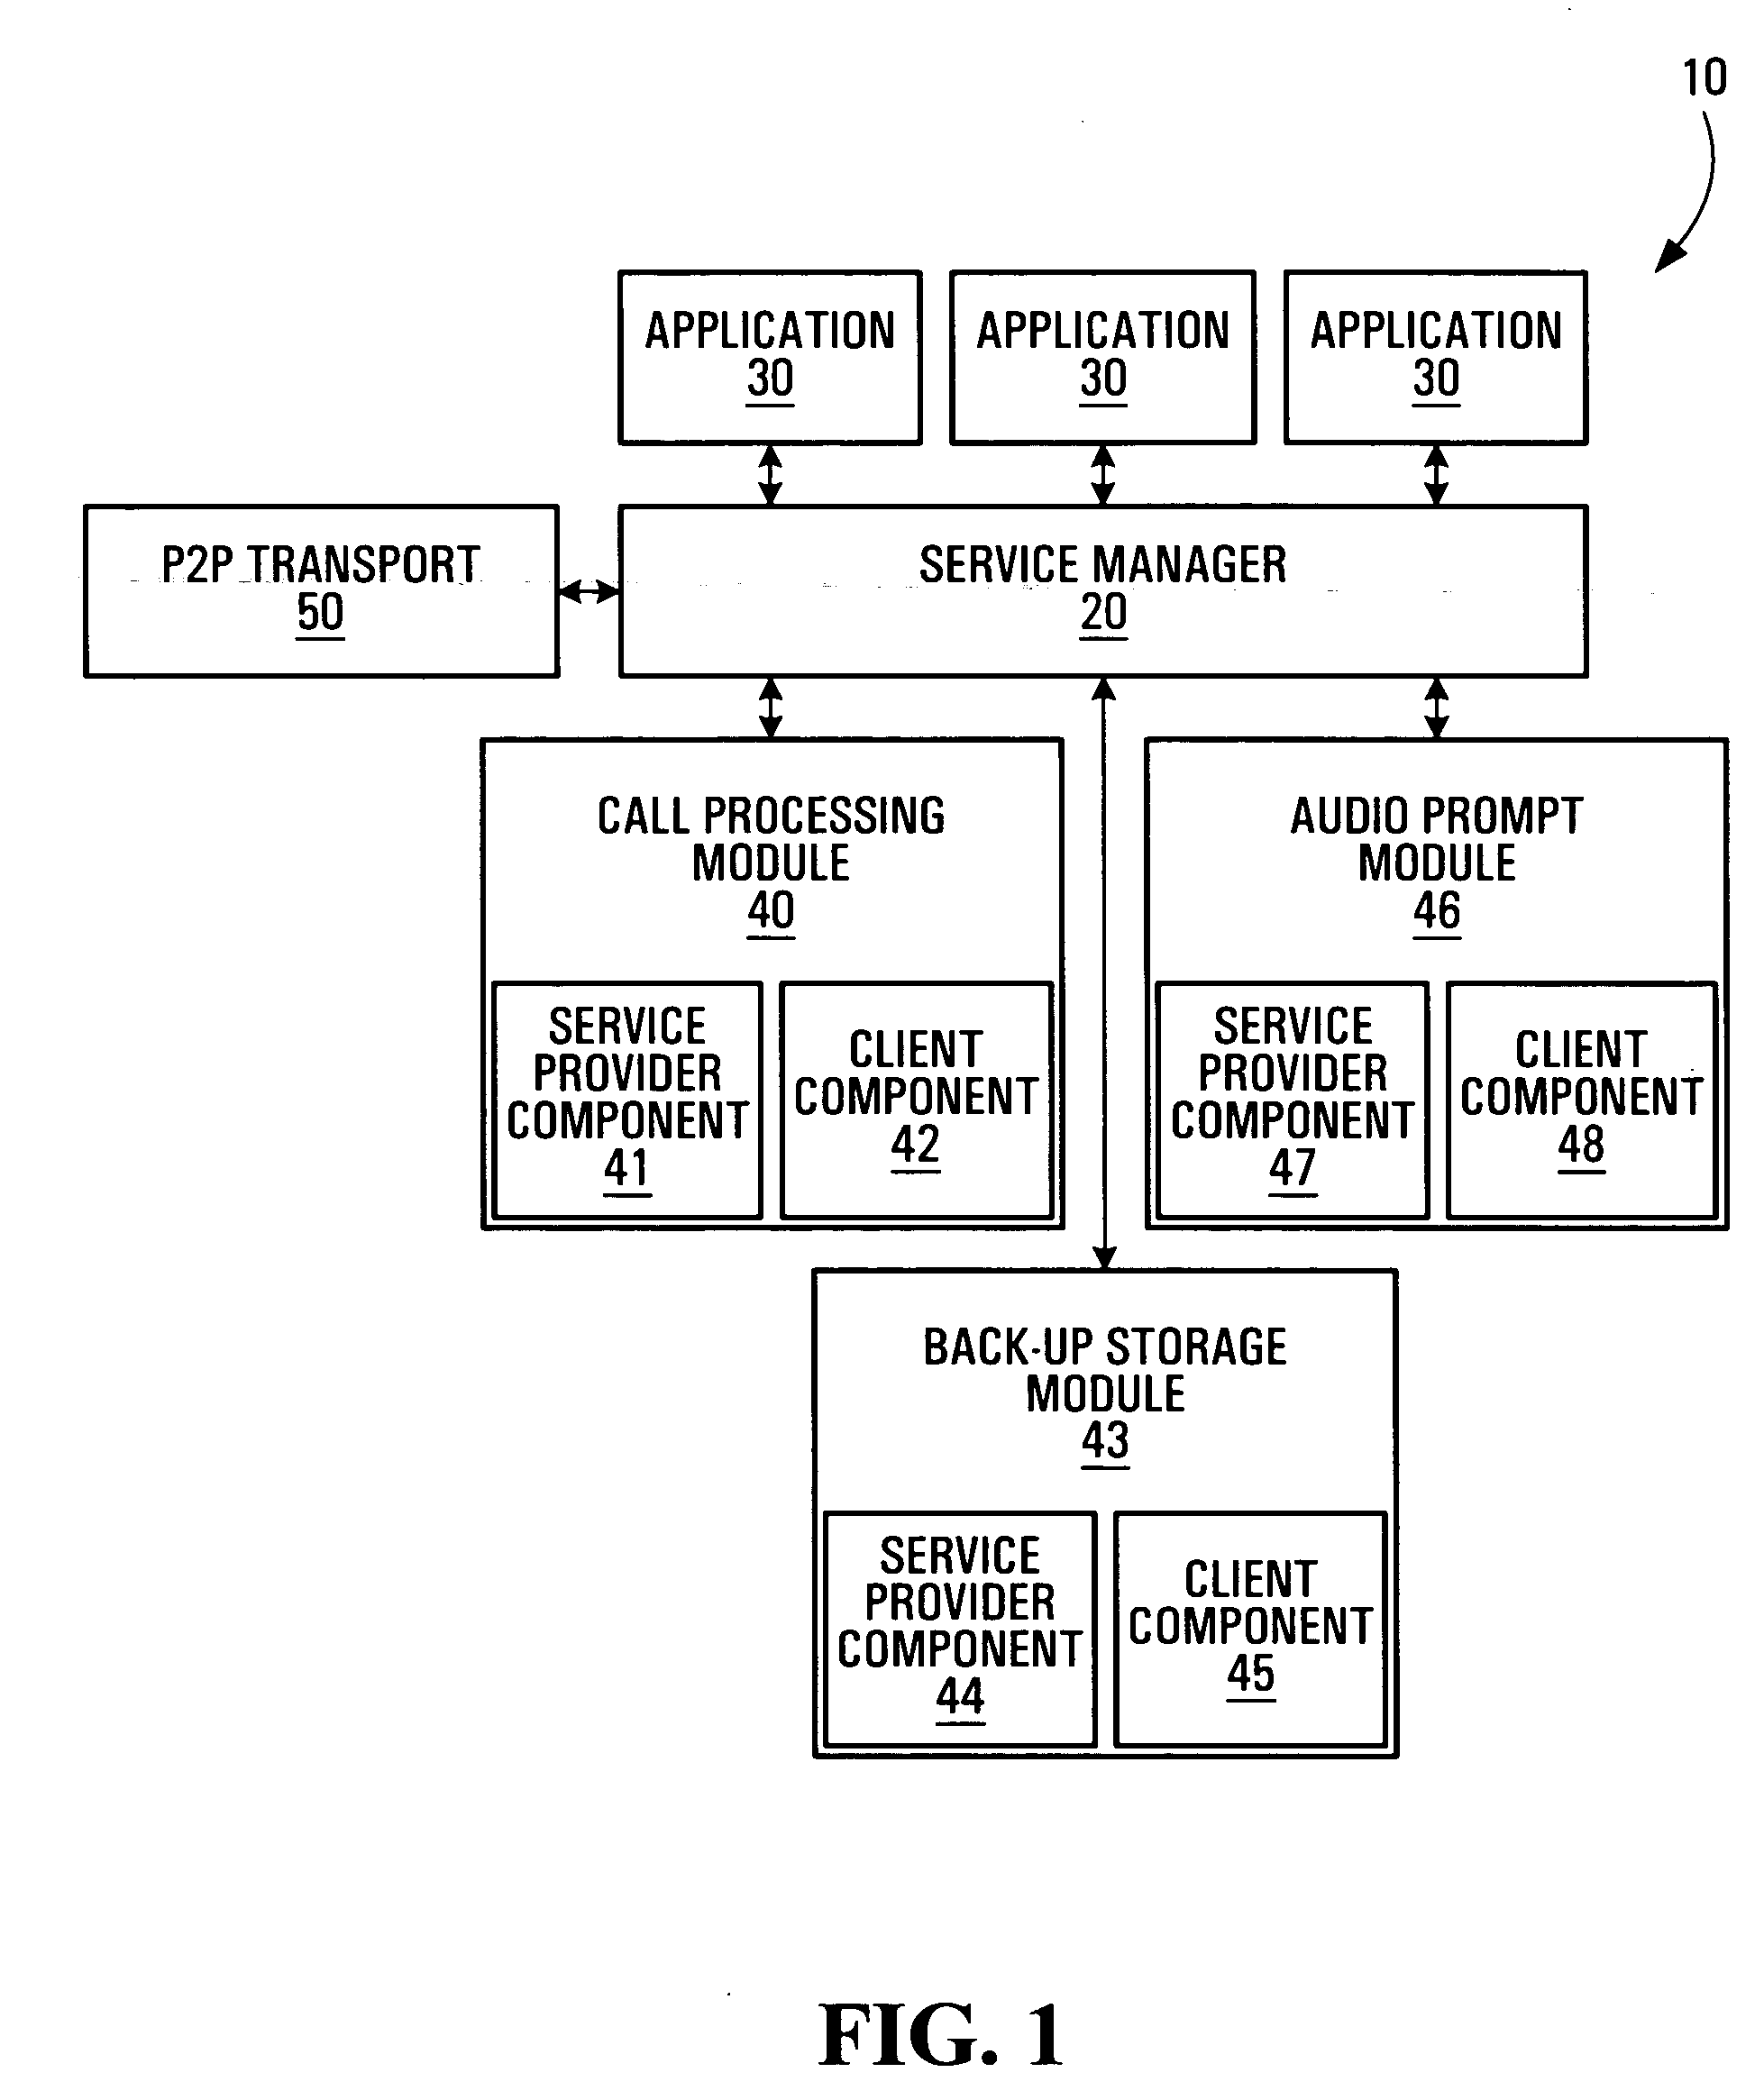 System and methods for announcing and locating services in a distributed peer-to-peer network